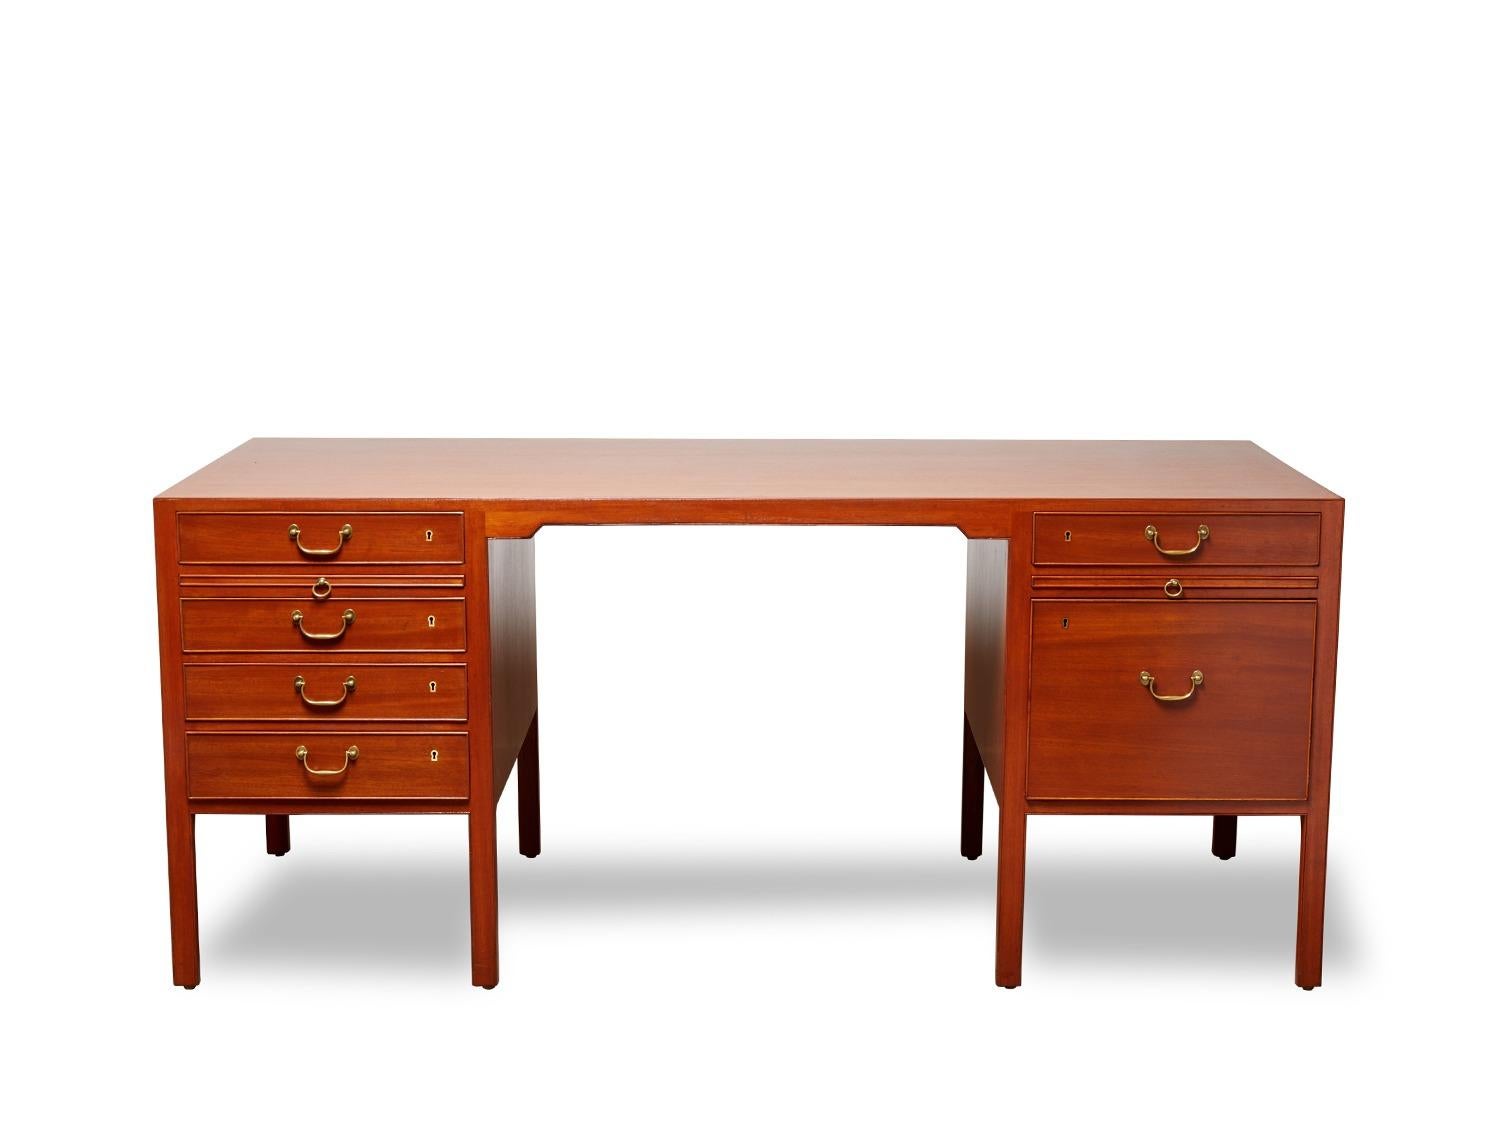 Description: Freestanding desk of mahogany, with eight legs, front with five drawers, back with pullout leaf and two cabinets. Made 1950–1960s by cabinetmaker A.J. Iversen.
Designer: Ole Wanscher
Condition: Wear due to age and use. Later hinges on